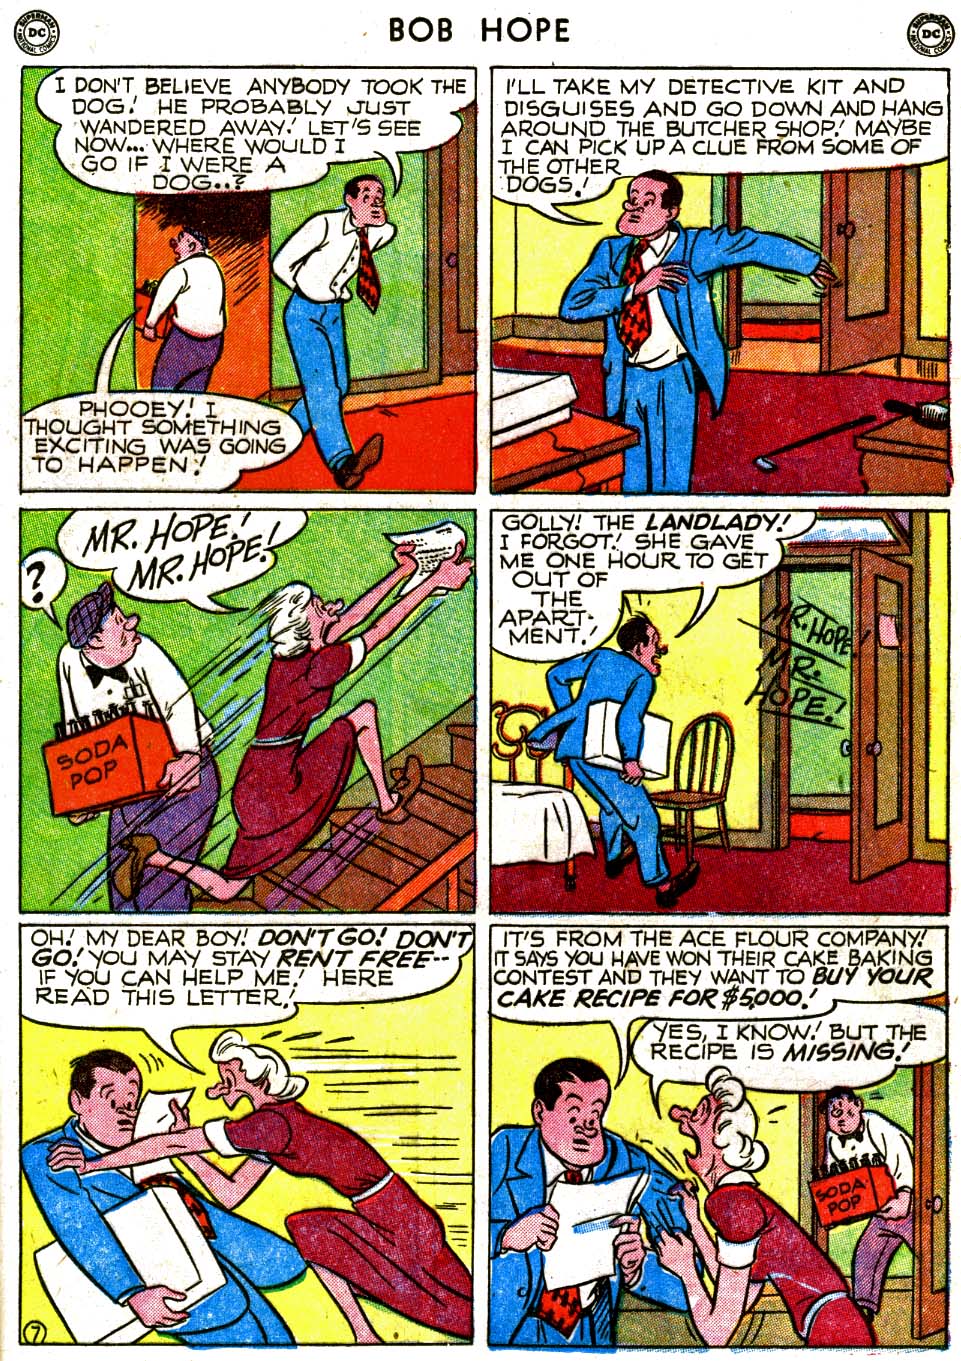 Read online The Adventures of Bob Hope comic -  Issue #4 - 19